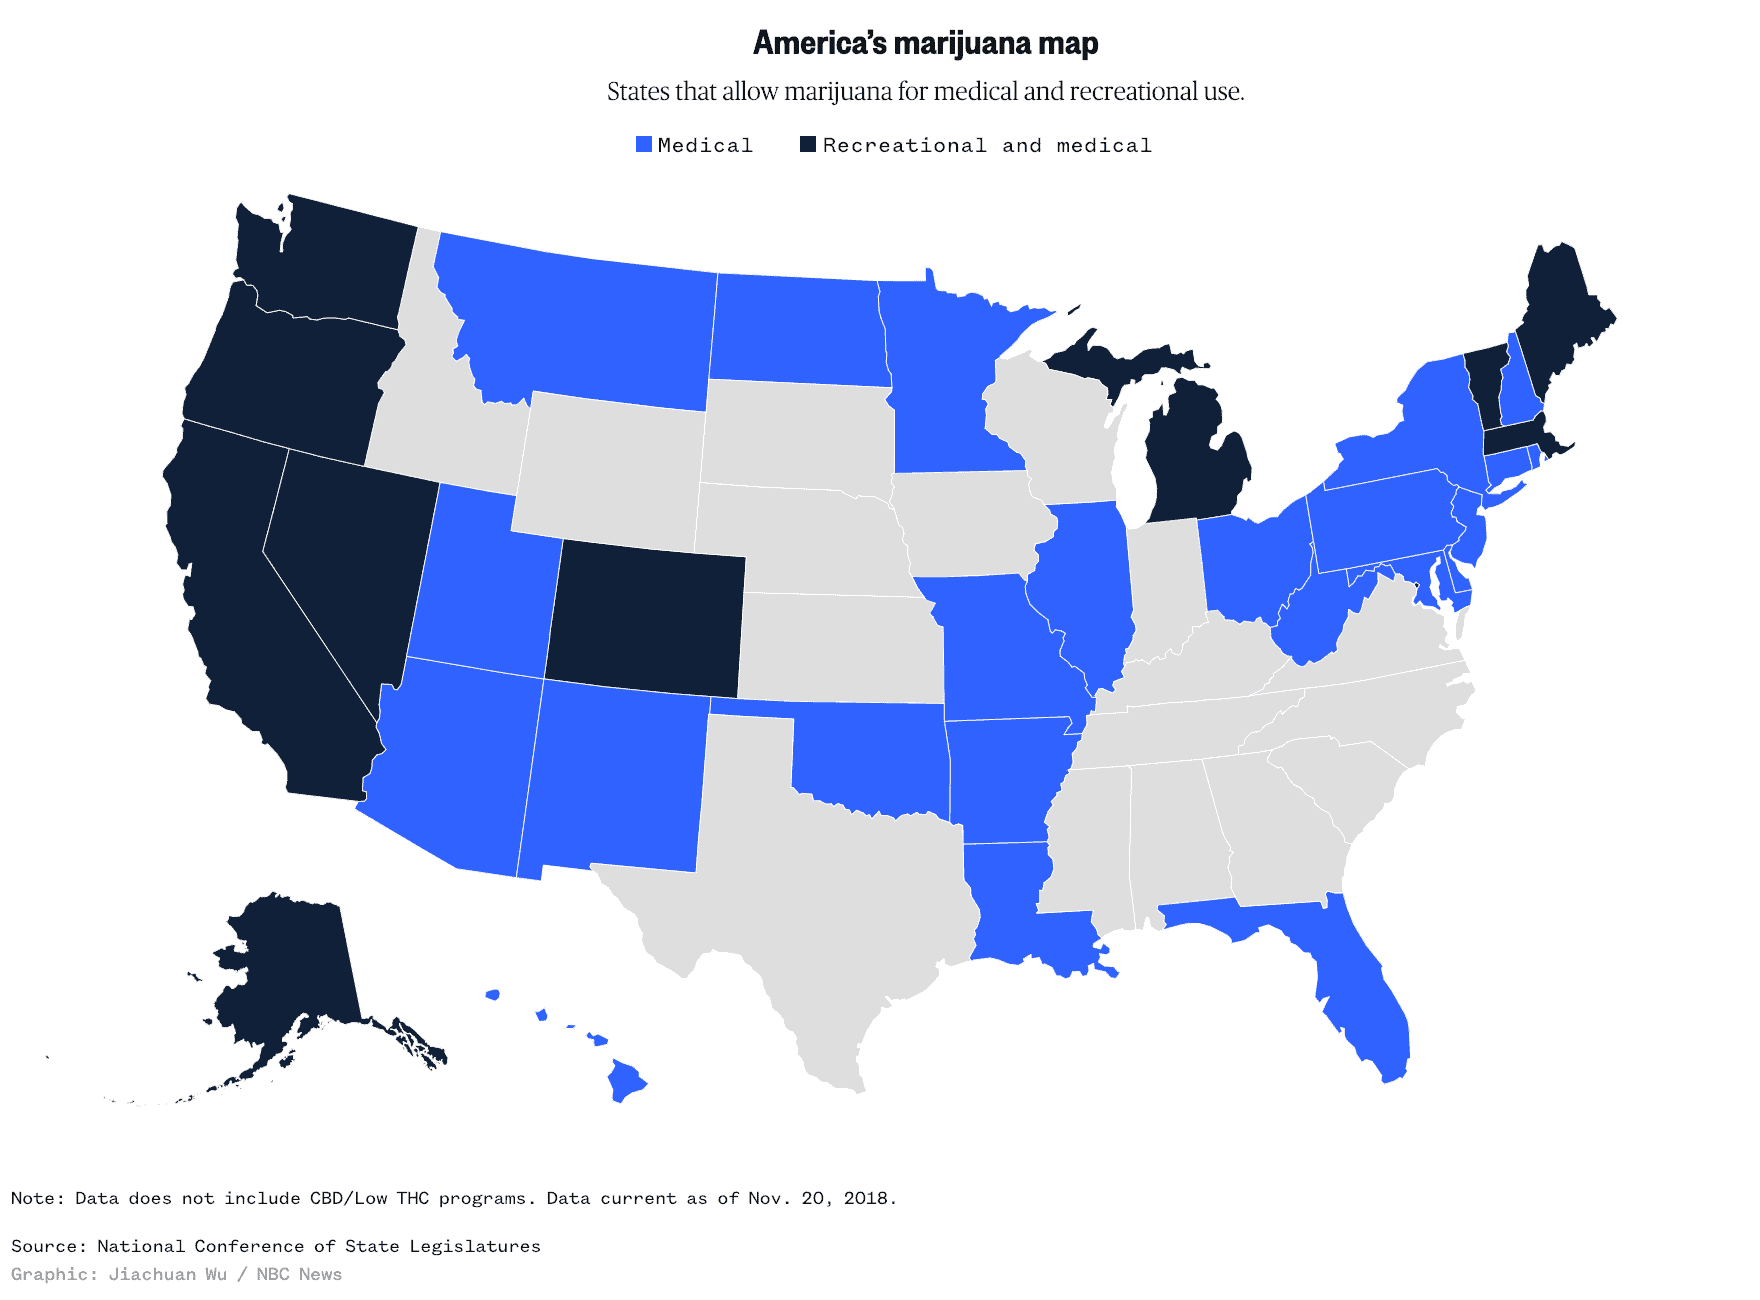 A map of the United States showing where marijuana is legal